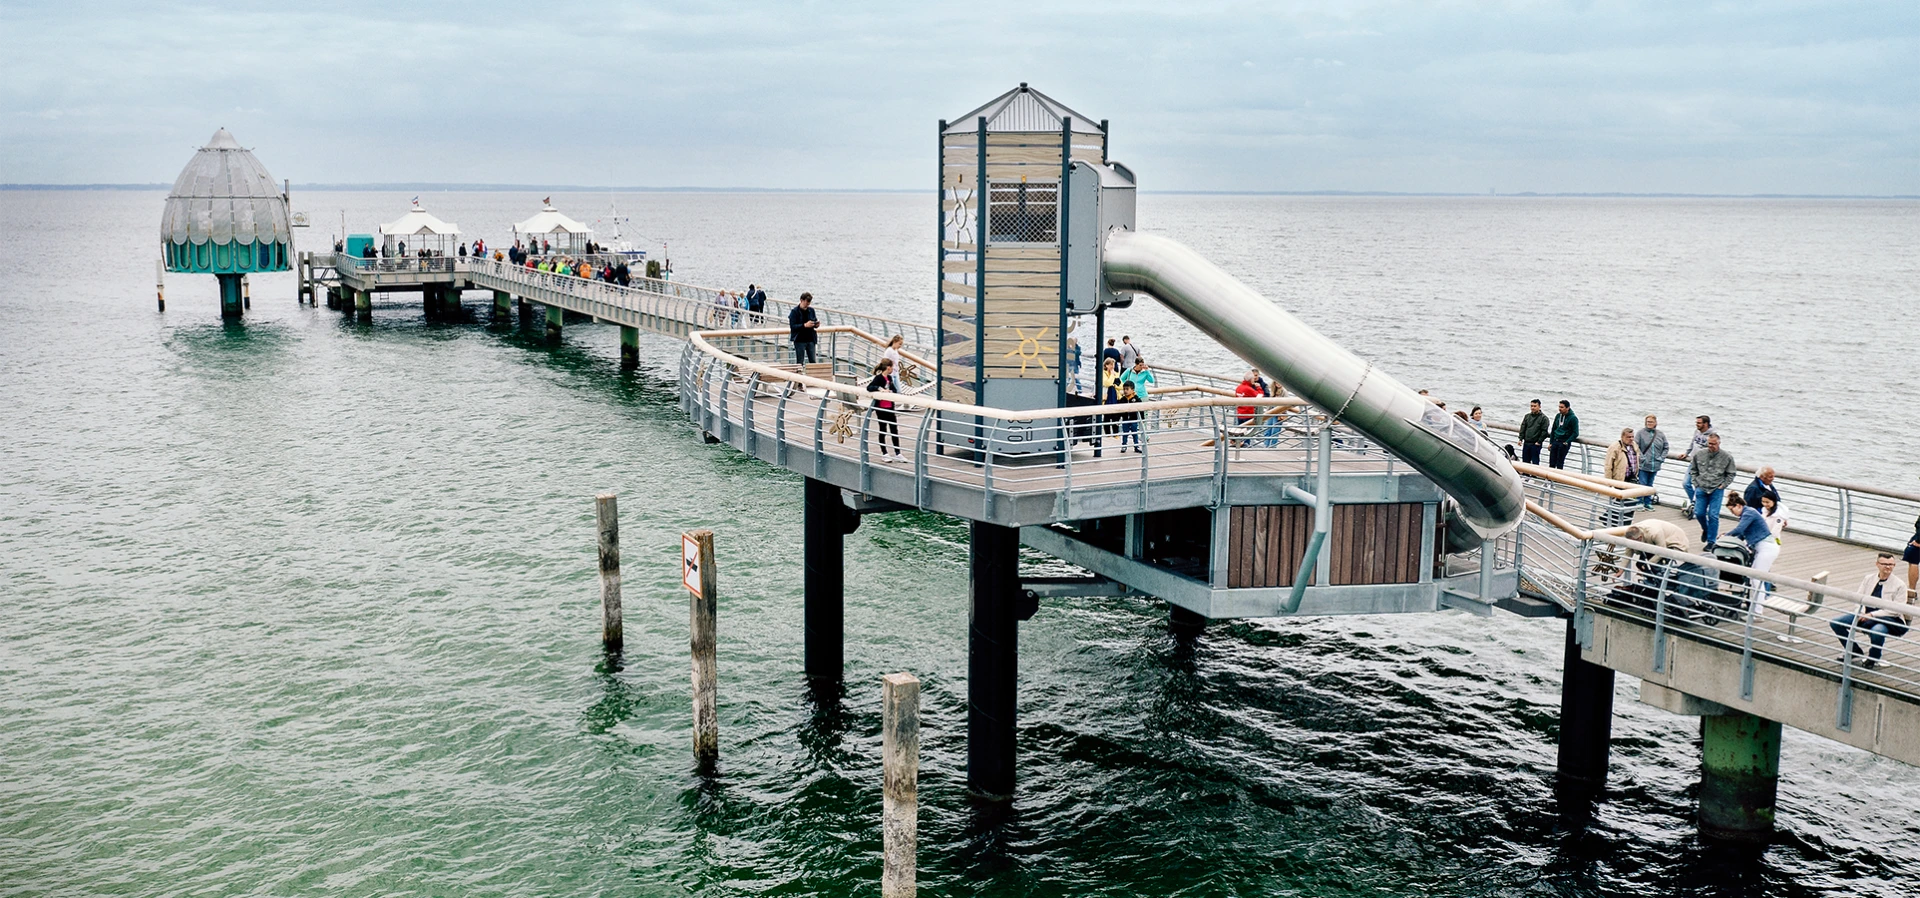 People walking at Grömitz pier with a custom playground tower with slide